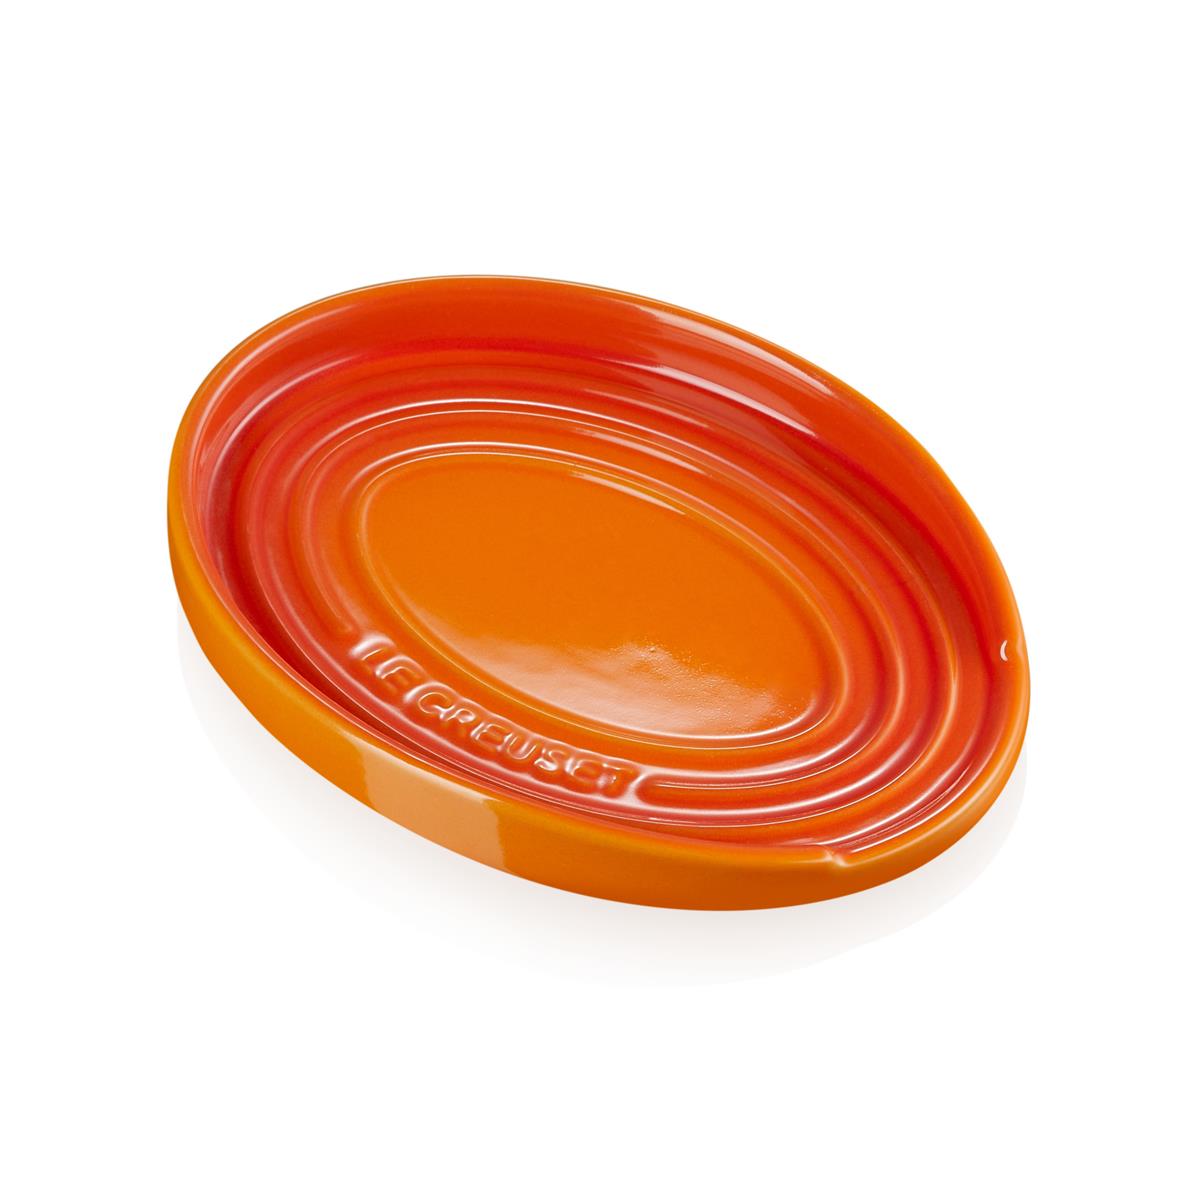 How long is the warranty period for the Le Creuset spoon rest?